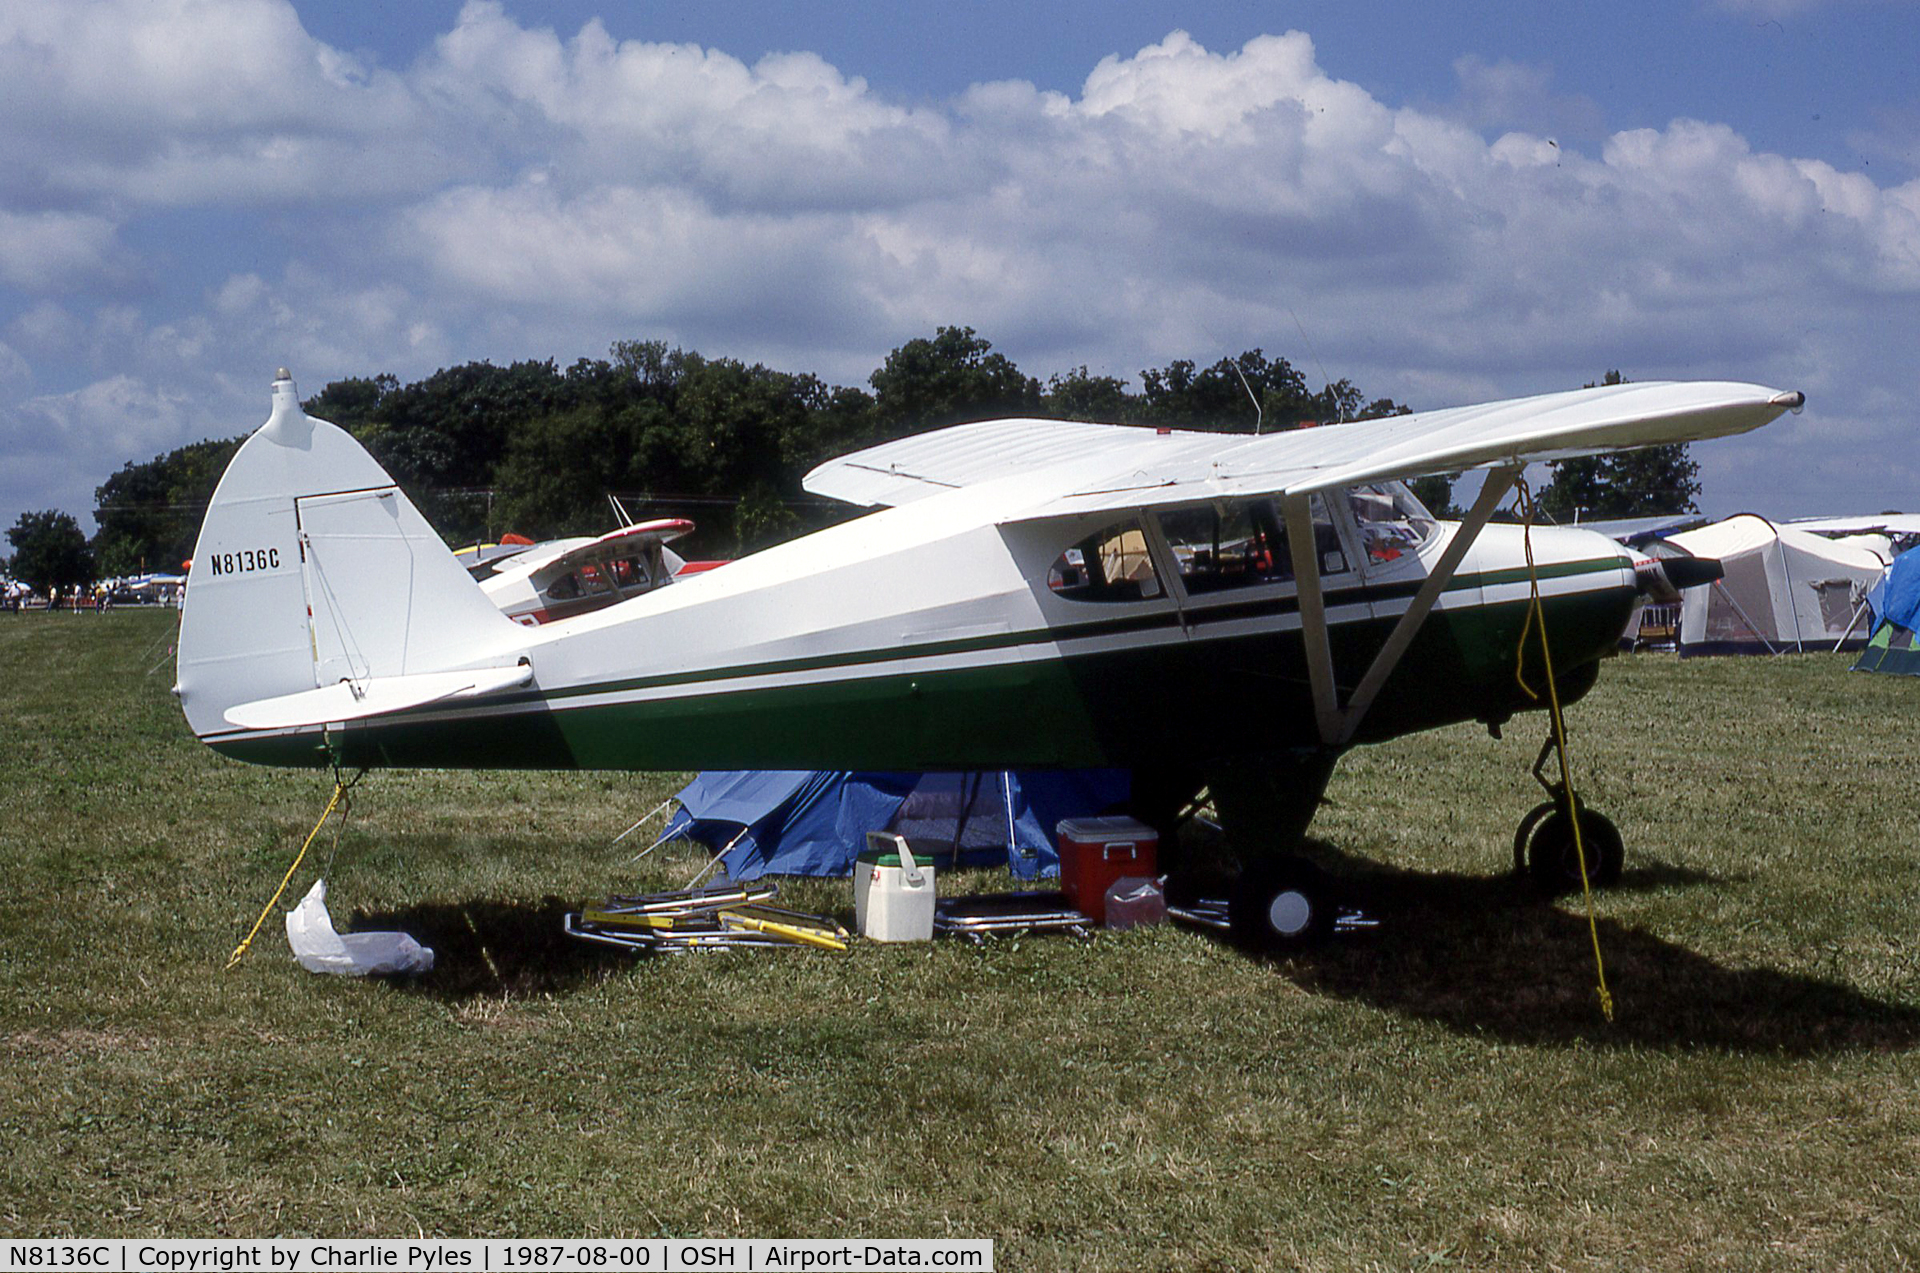 N8136C, 1954 Piper PA-22-135 Tri-Pacer C/N 22-2281, Camping at OSH